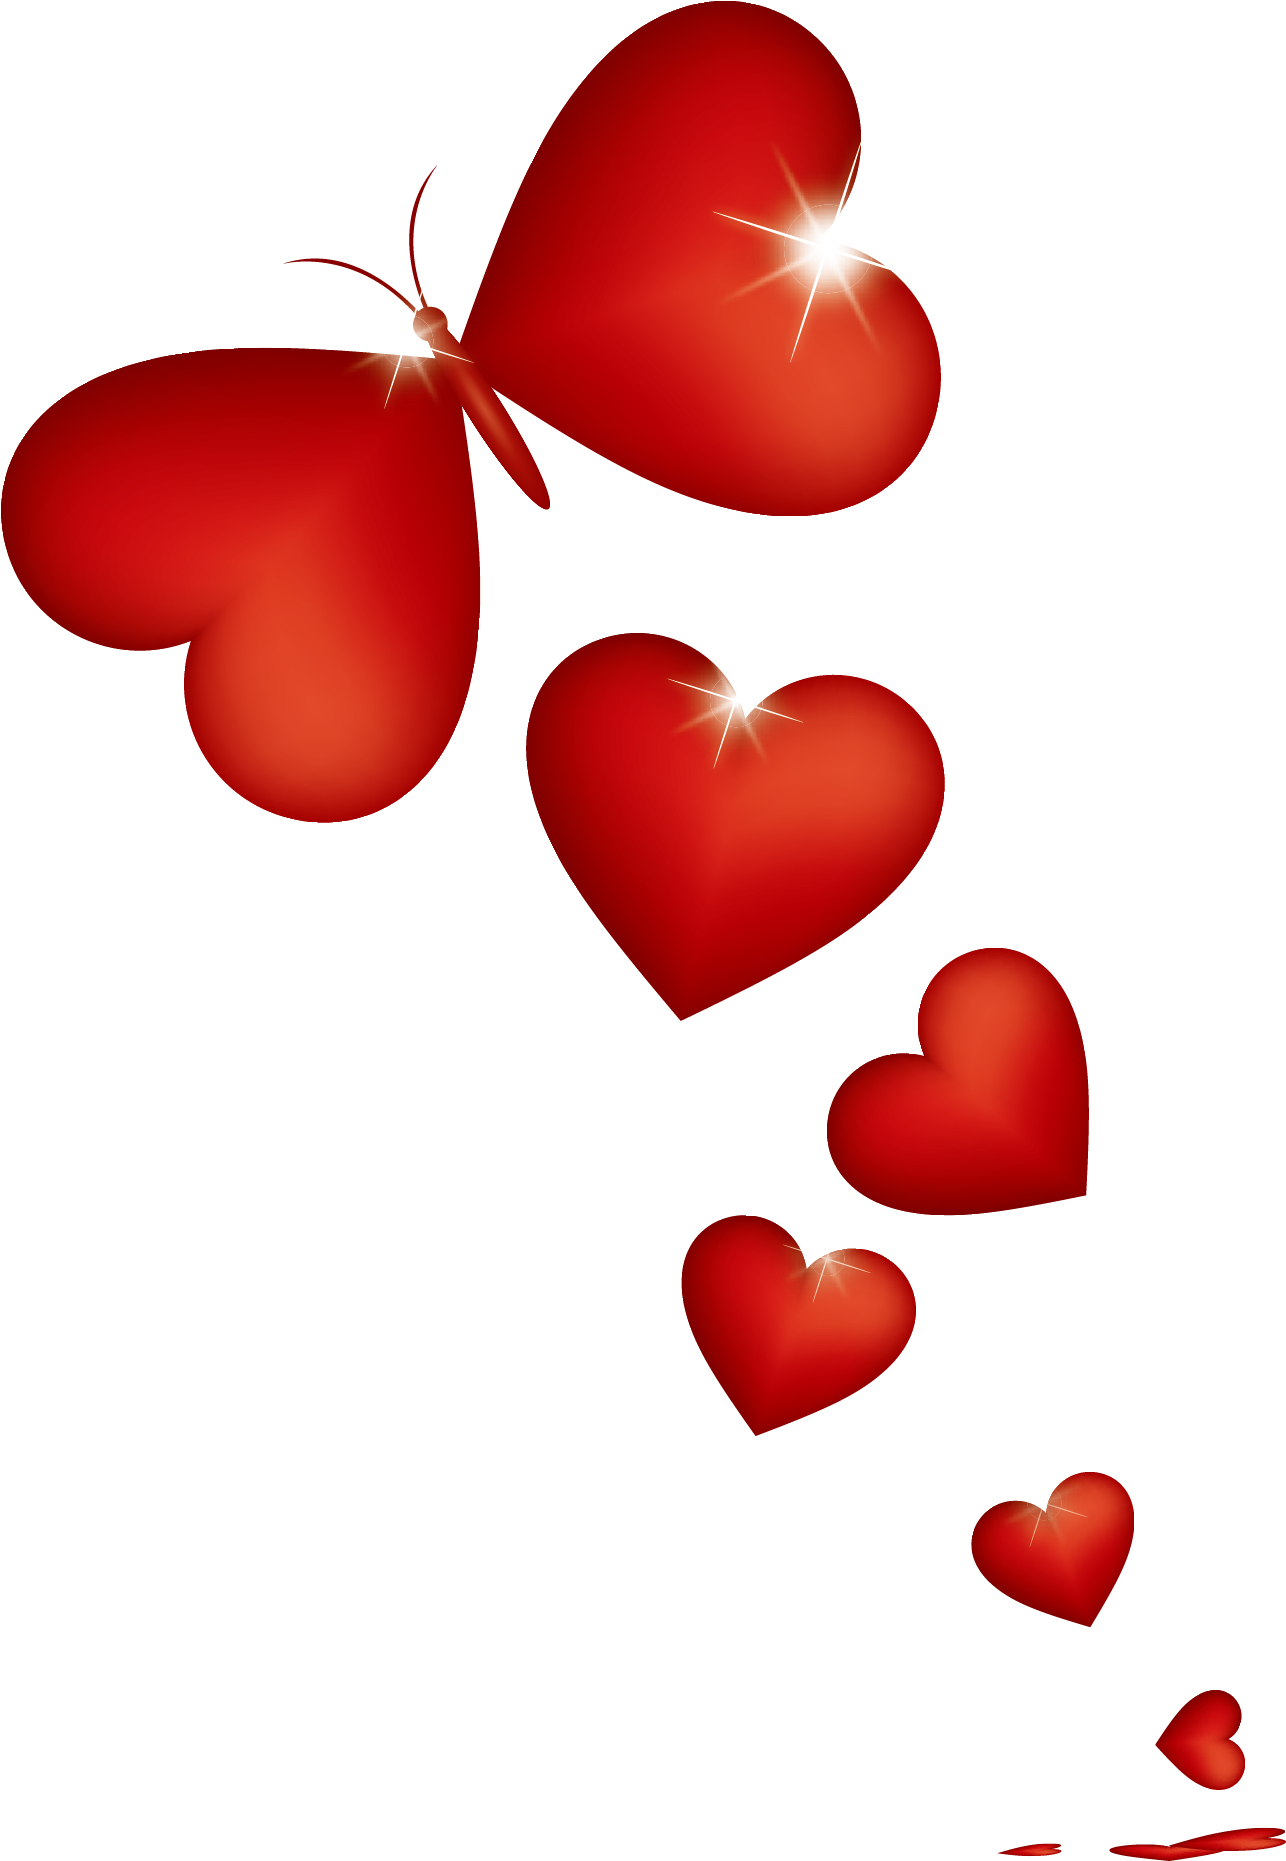 Butterfly Heart Valentines Day Clip Art - 2 Hearts Beat As 1 (1285x1907)